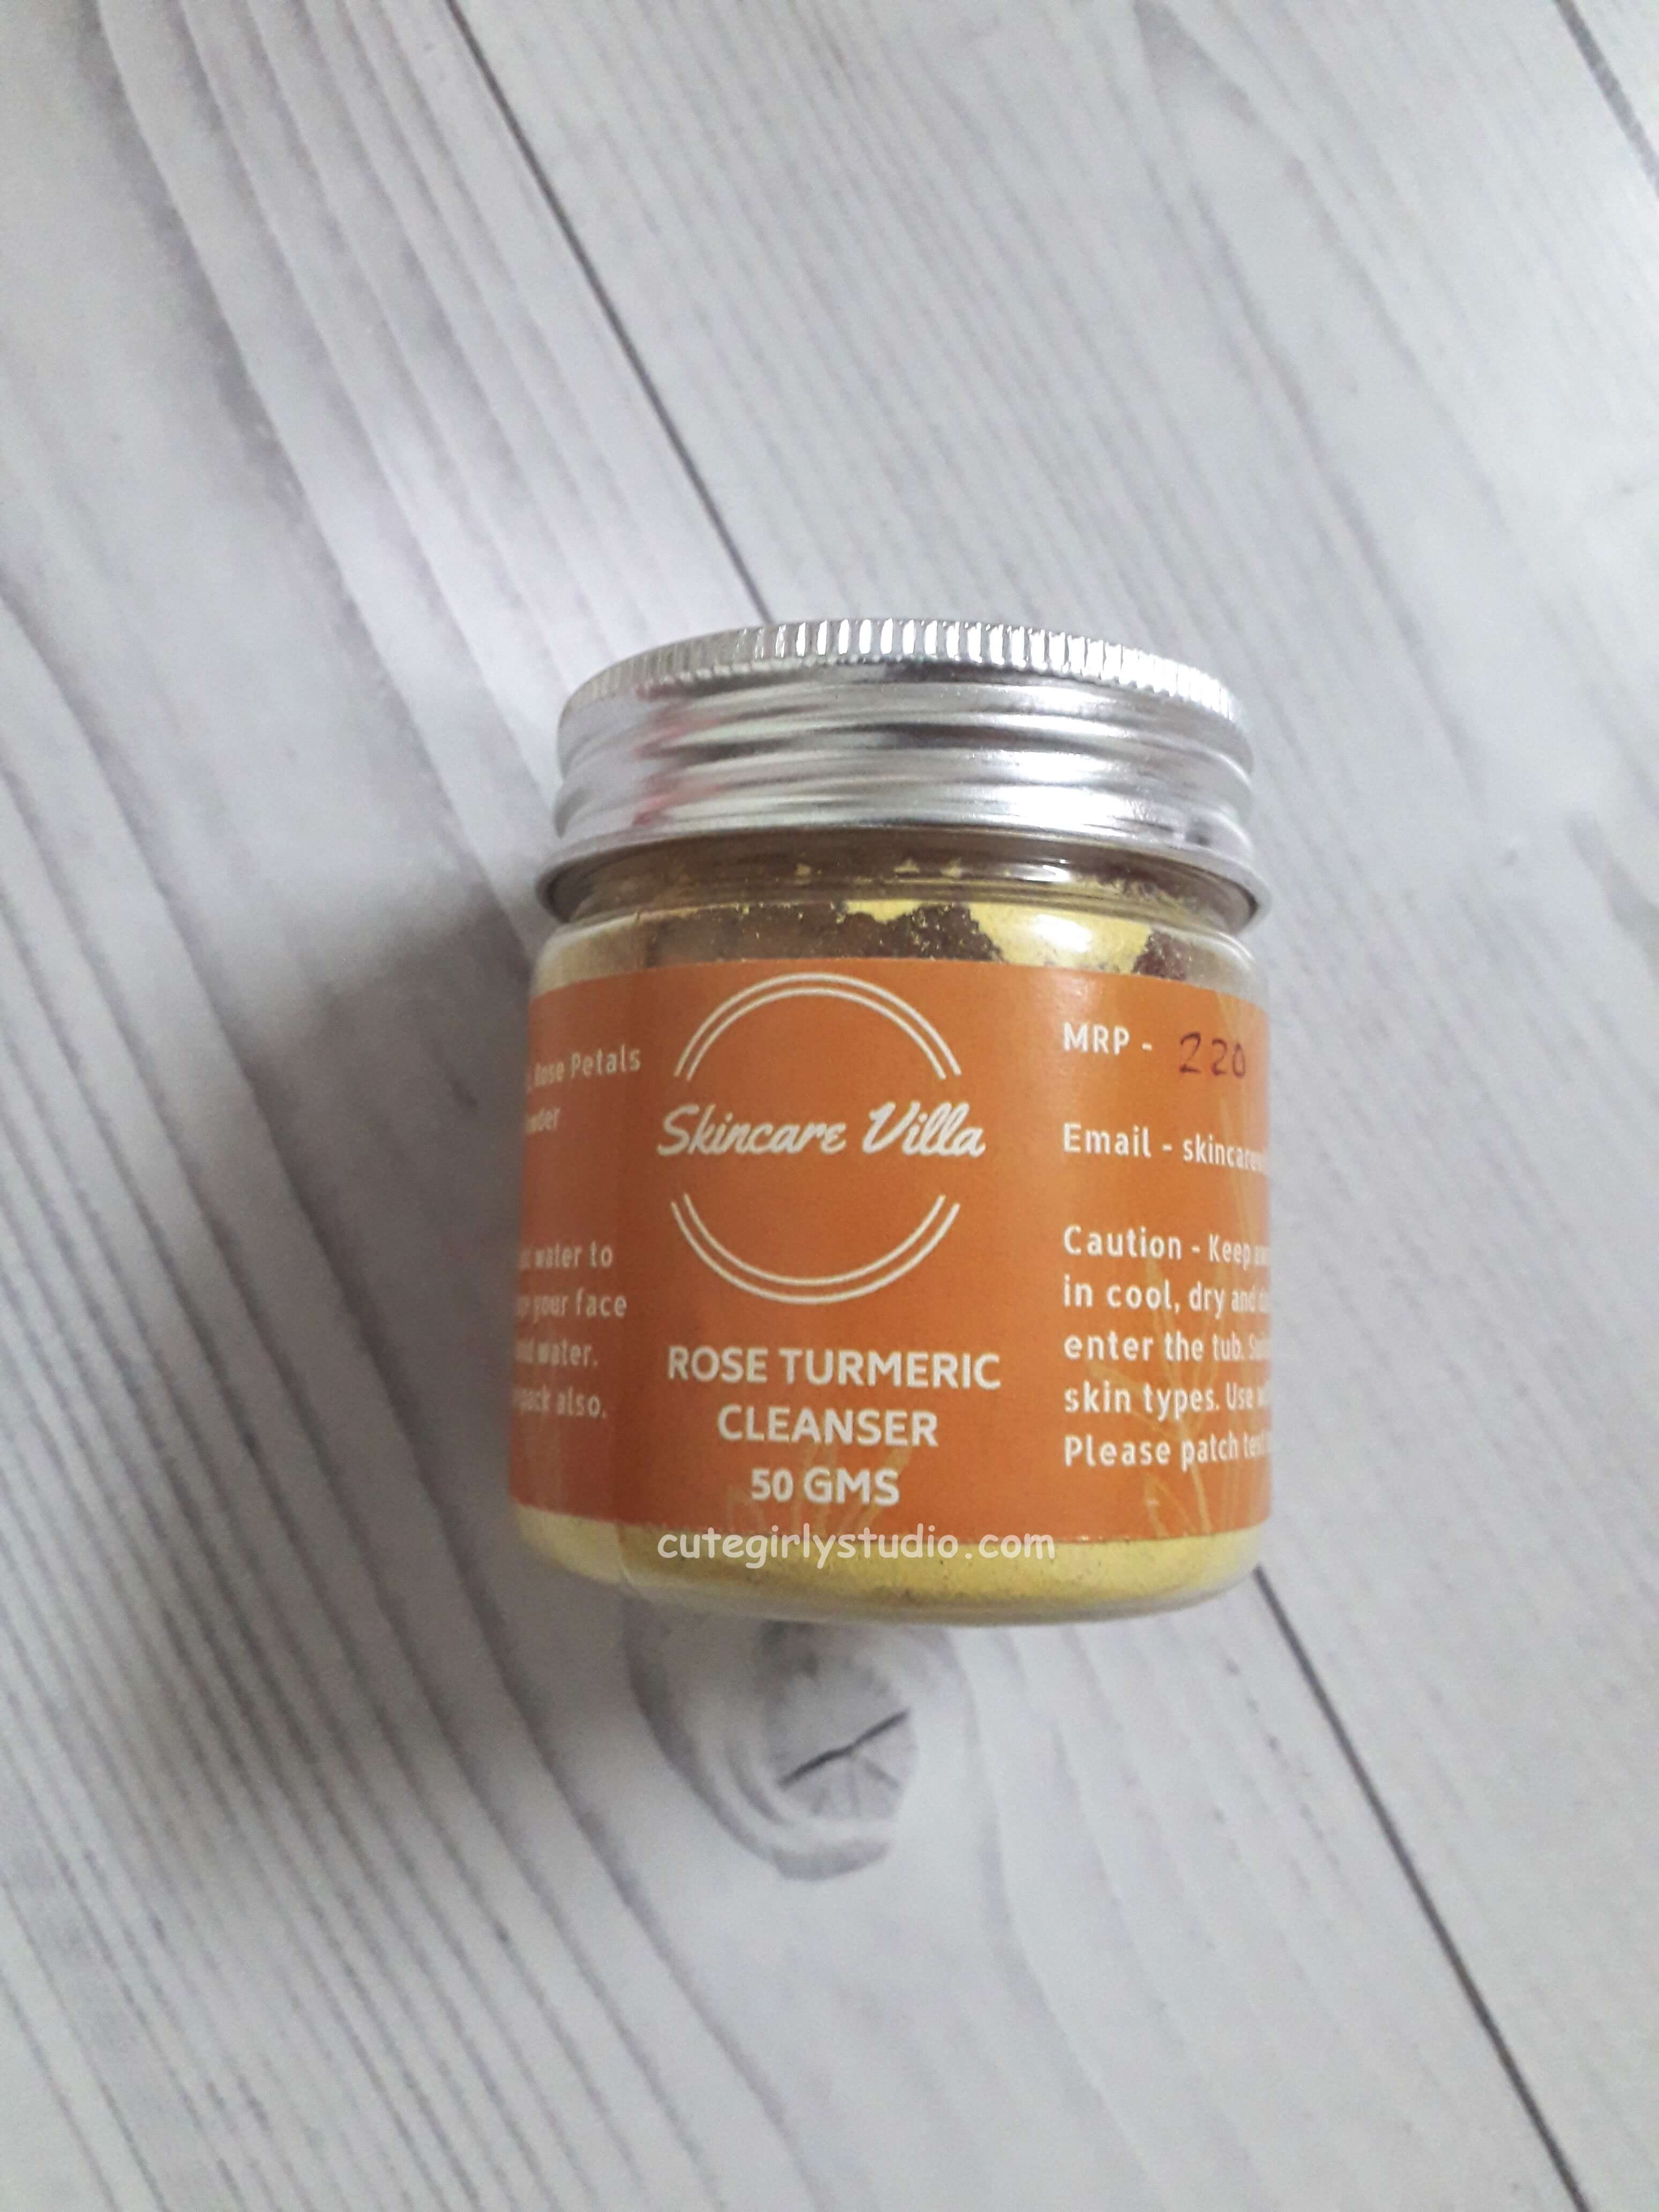 Skincare villa rose and turmeric cleanser review